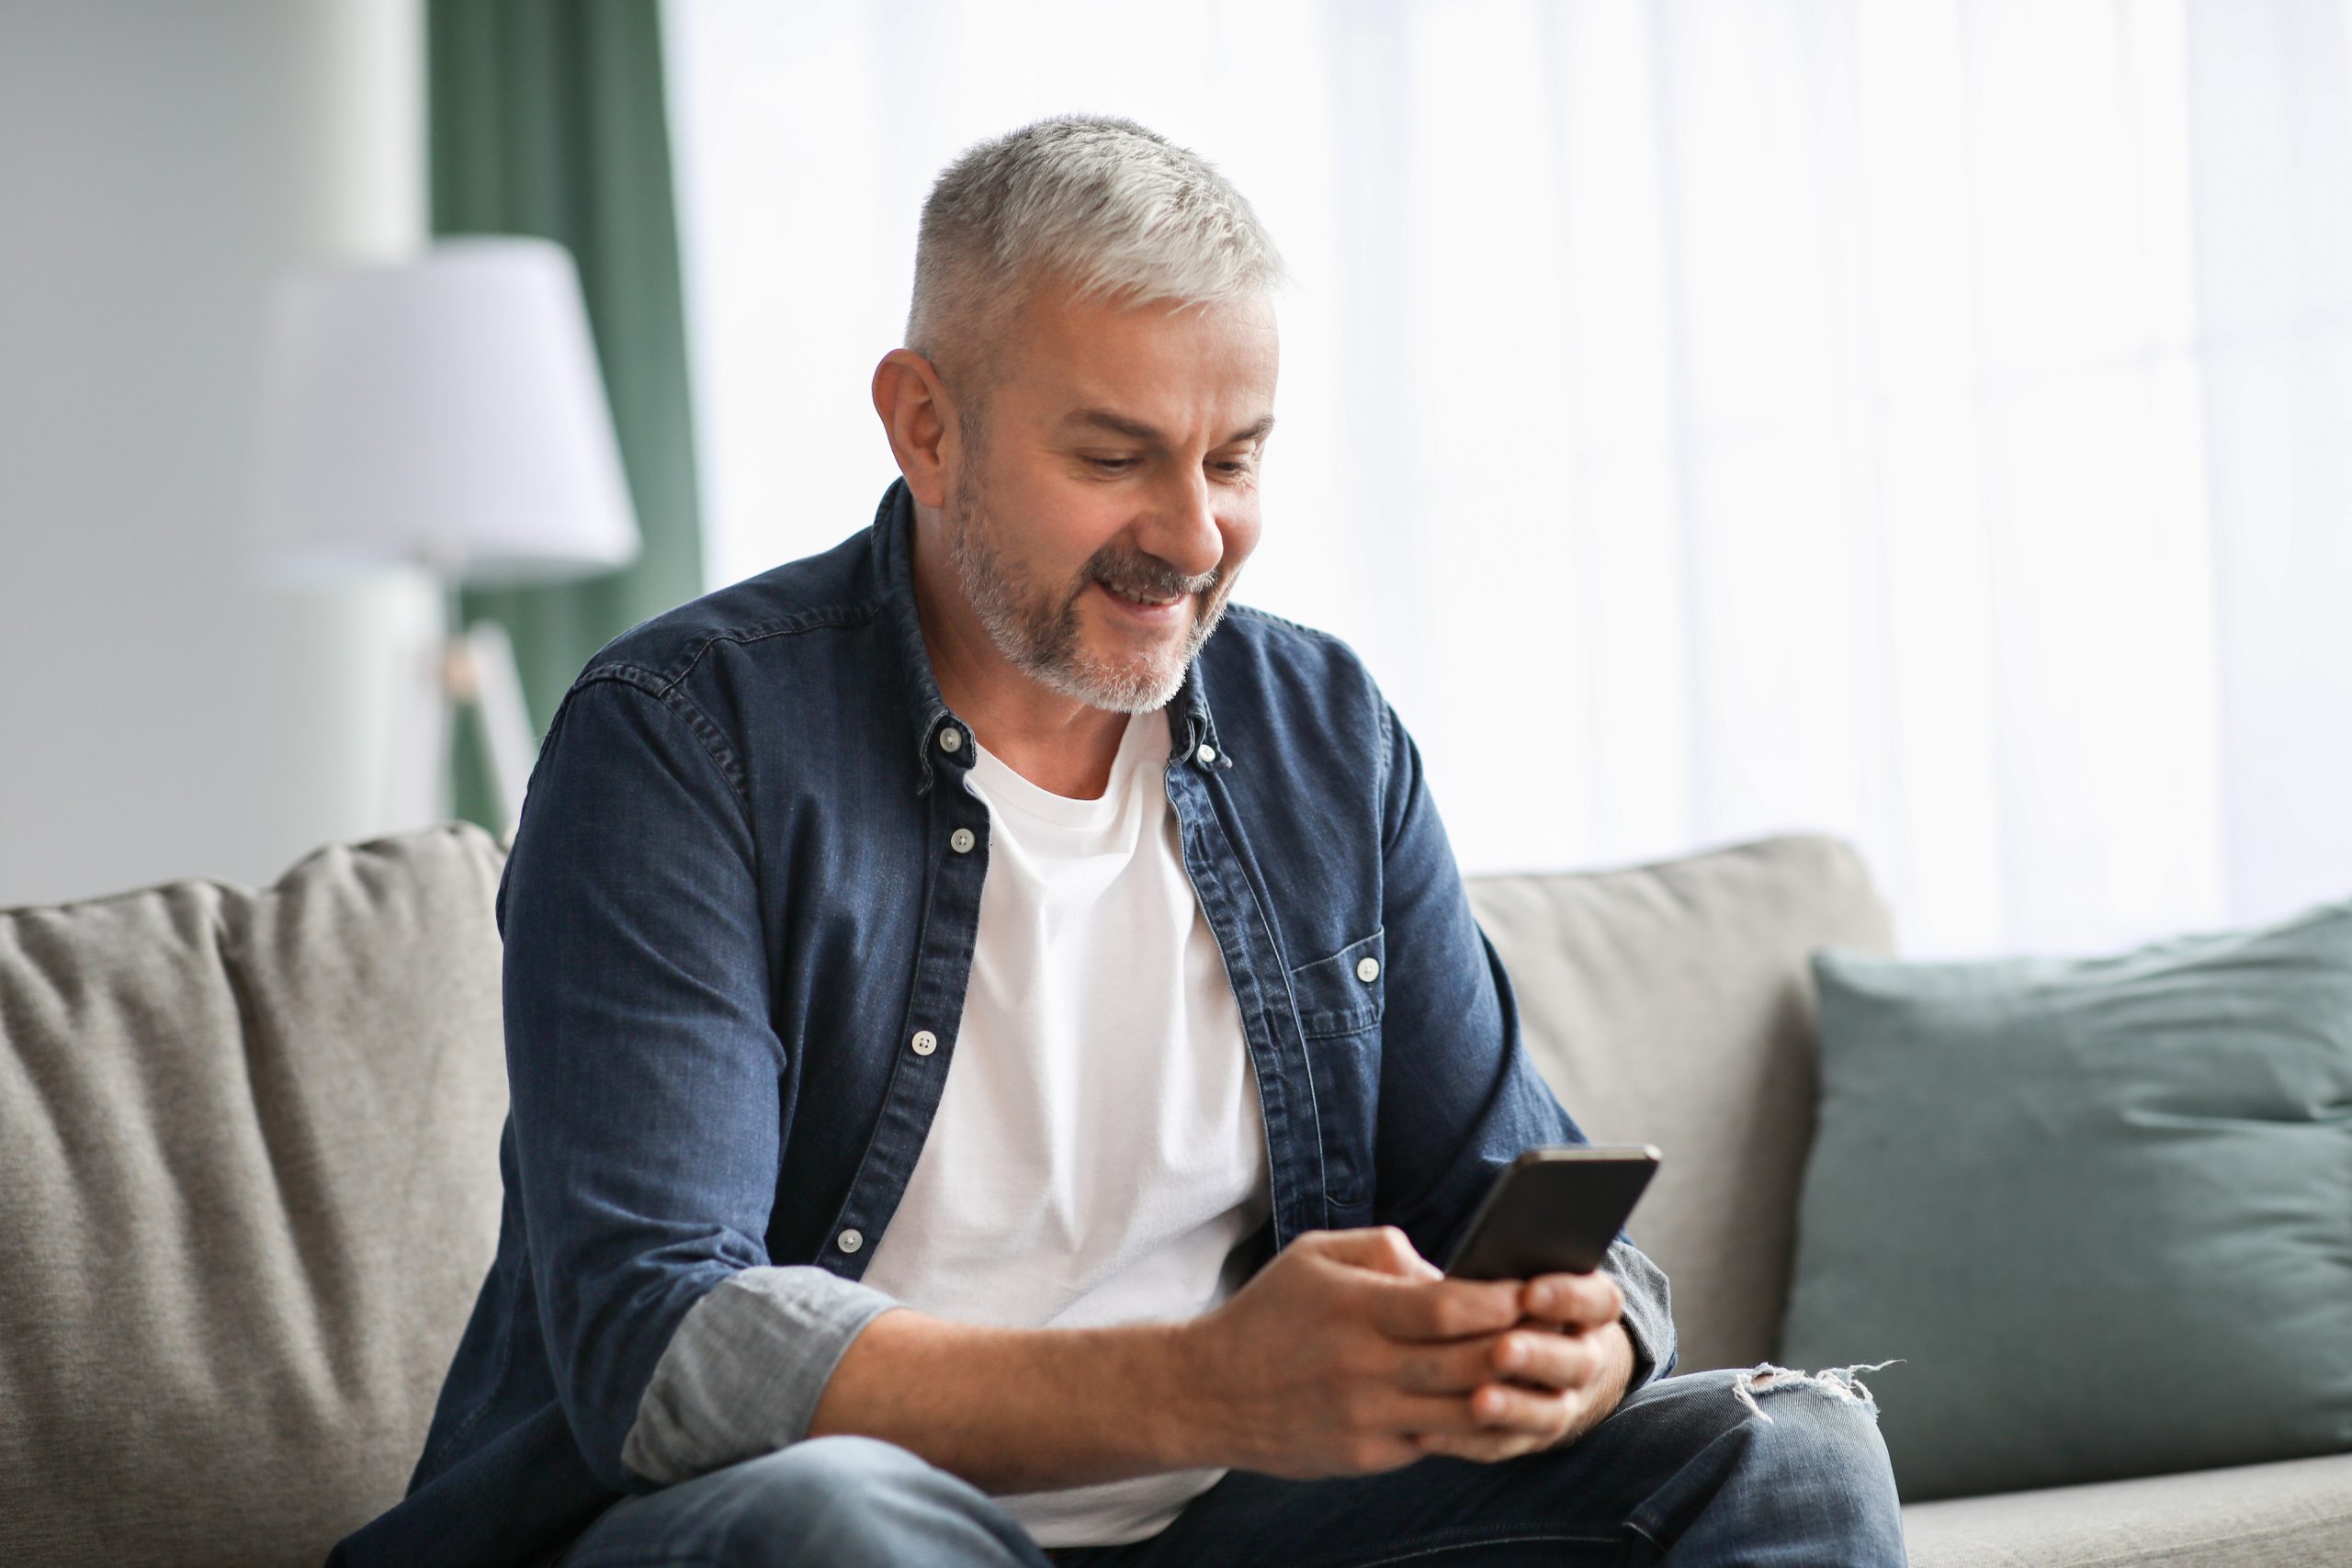 A man smiles while he looks down at his phone. Troutman & Troutman provides local, personal and skilled help with disability benefits claims for people in Tulsa.